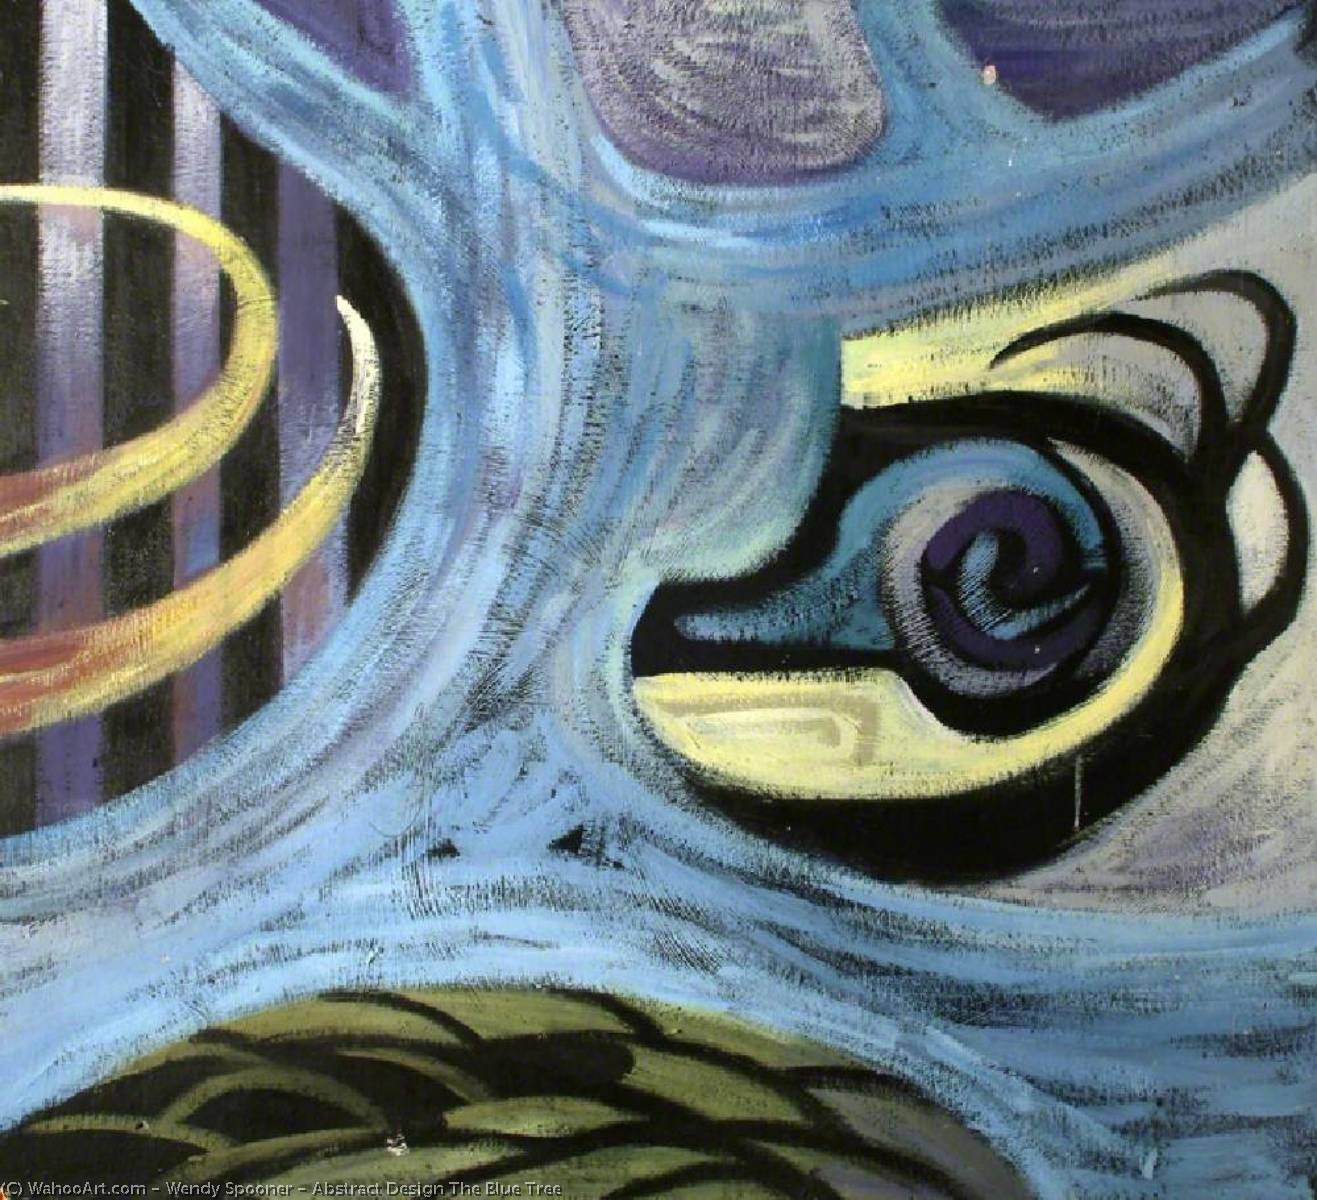 WikiOO.org - Encyclopedia of Fine Arts - Lukisan, Artwork Wendy Spooner - Abstract Design The Blue Tree